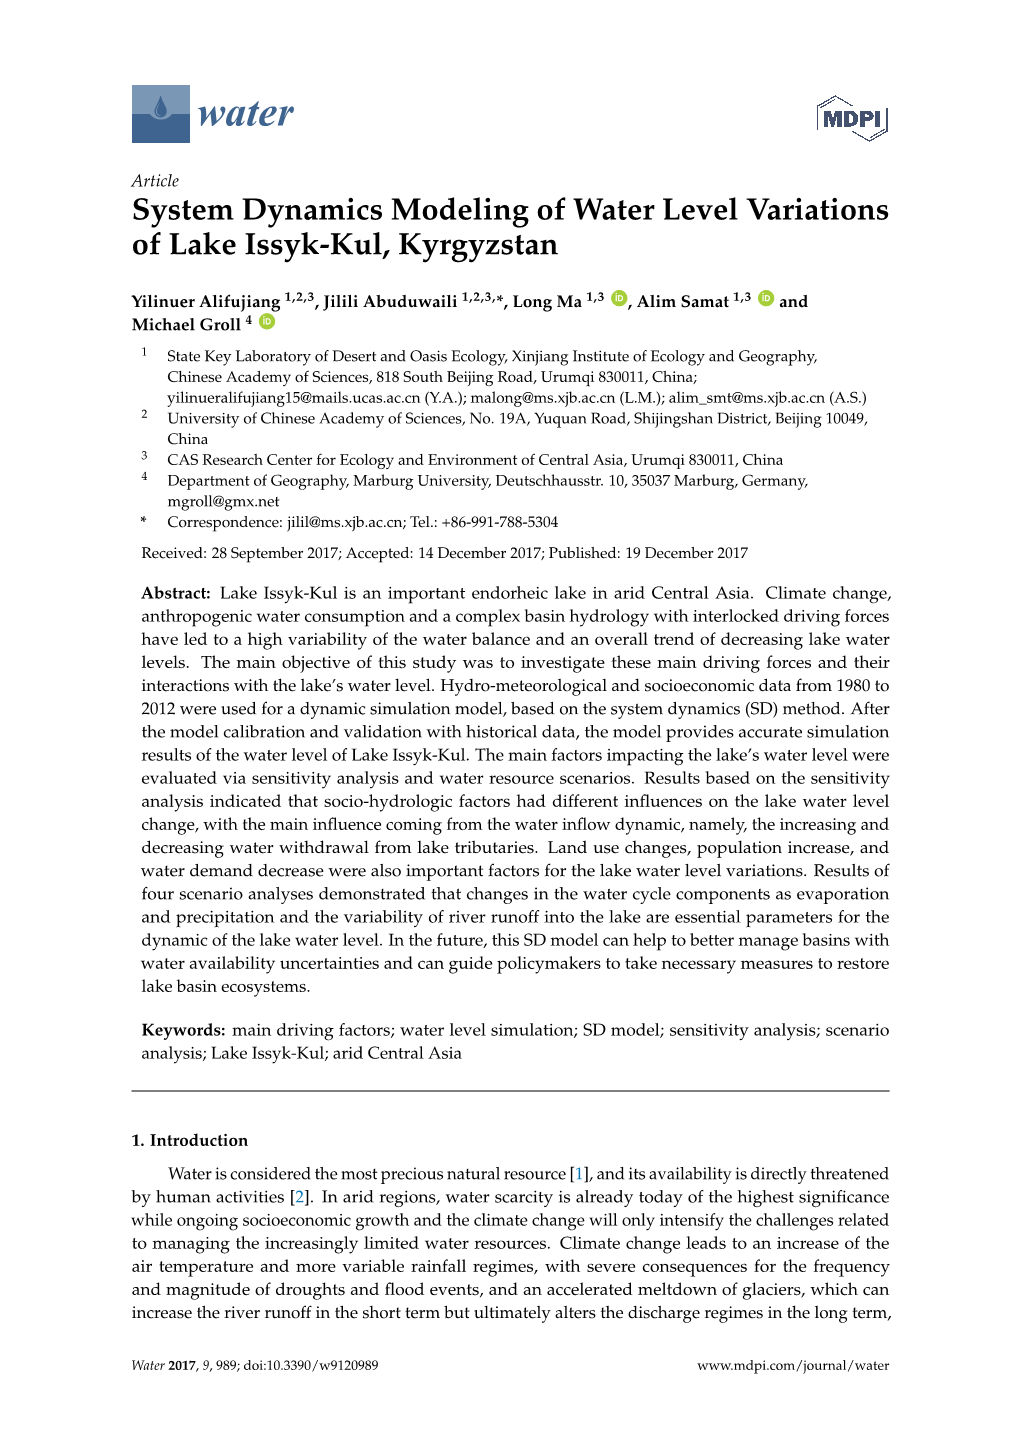 System Dynamics Modeling of Water Level Variations of Lake Issyk-Kul, Kyrgyzstan